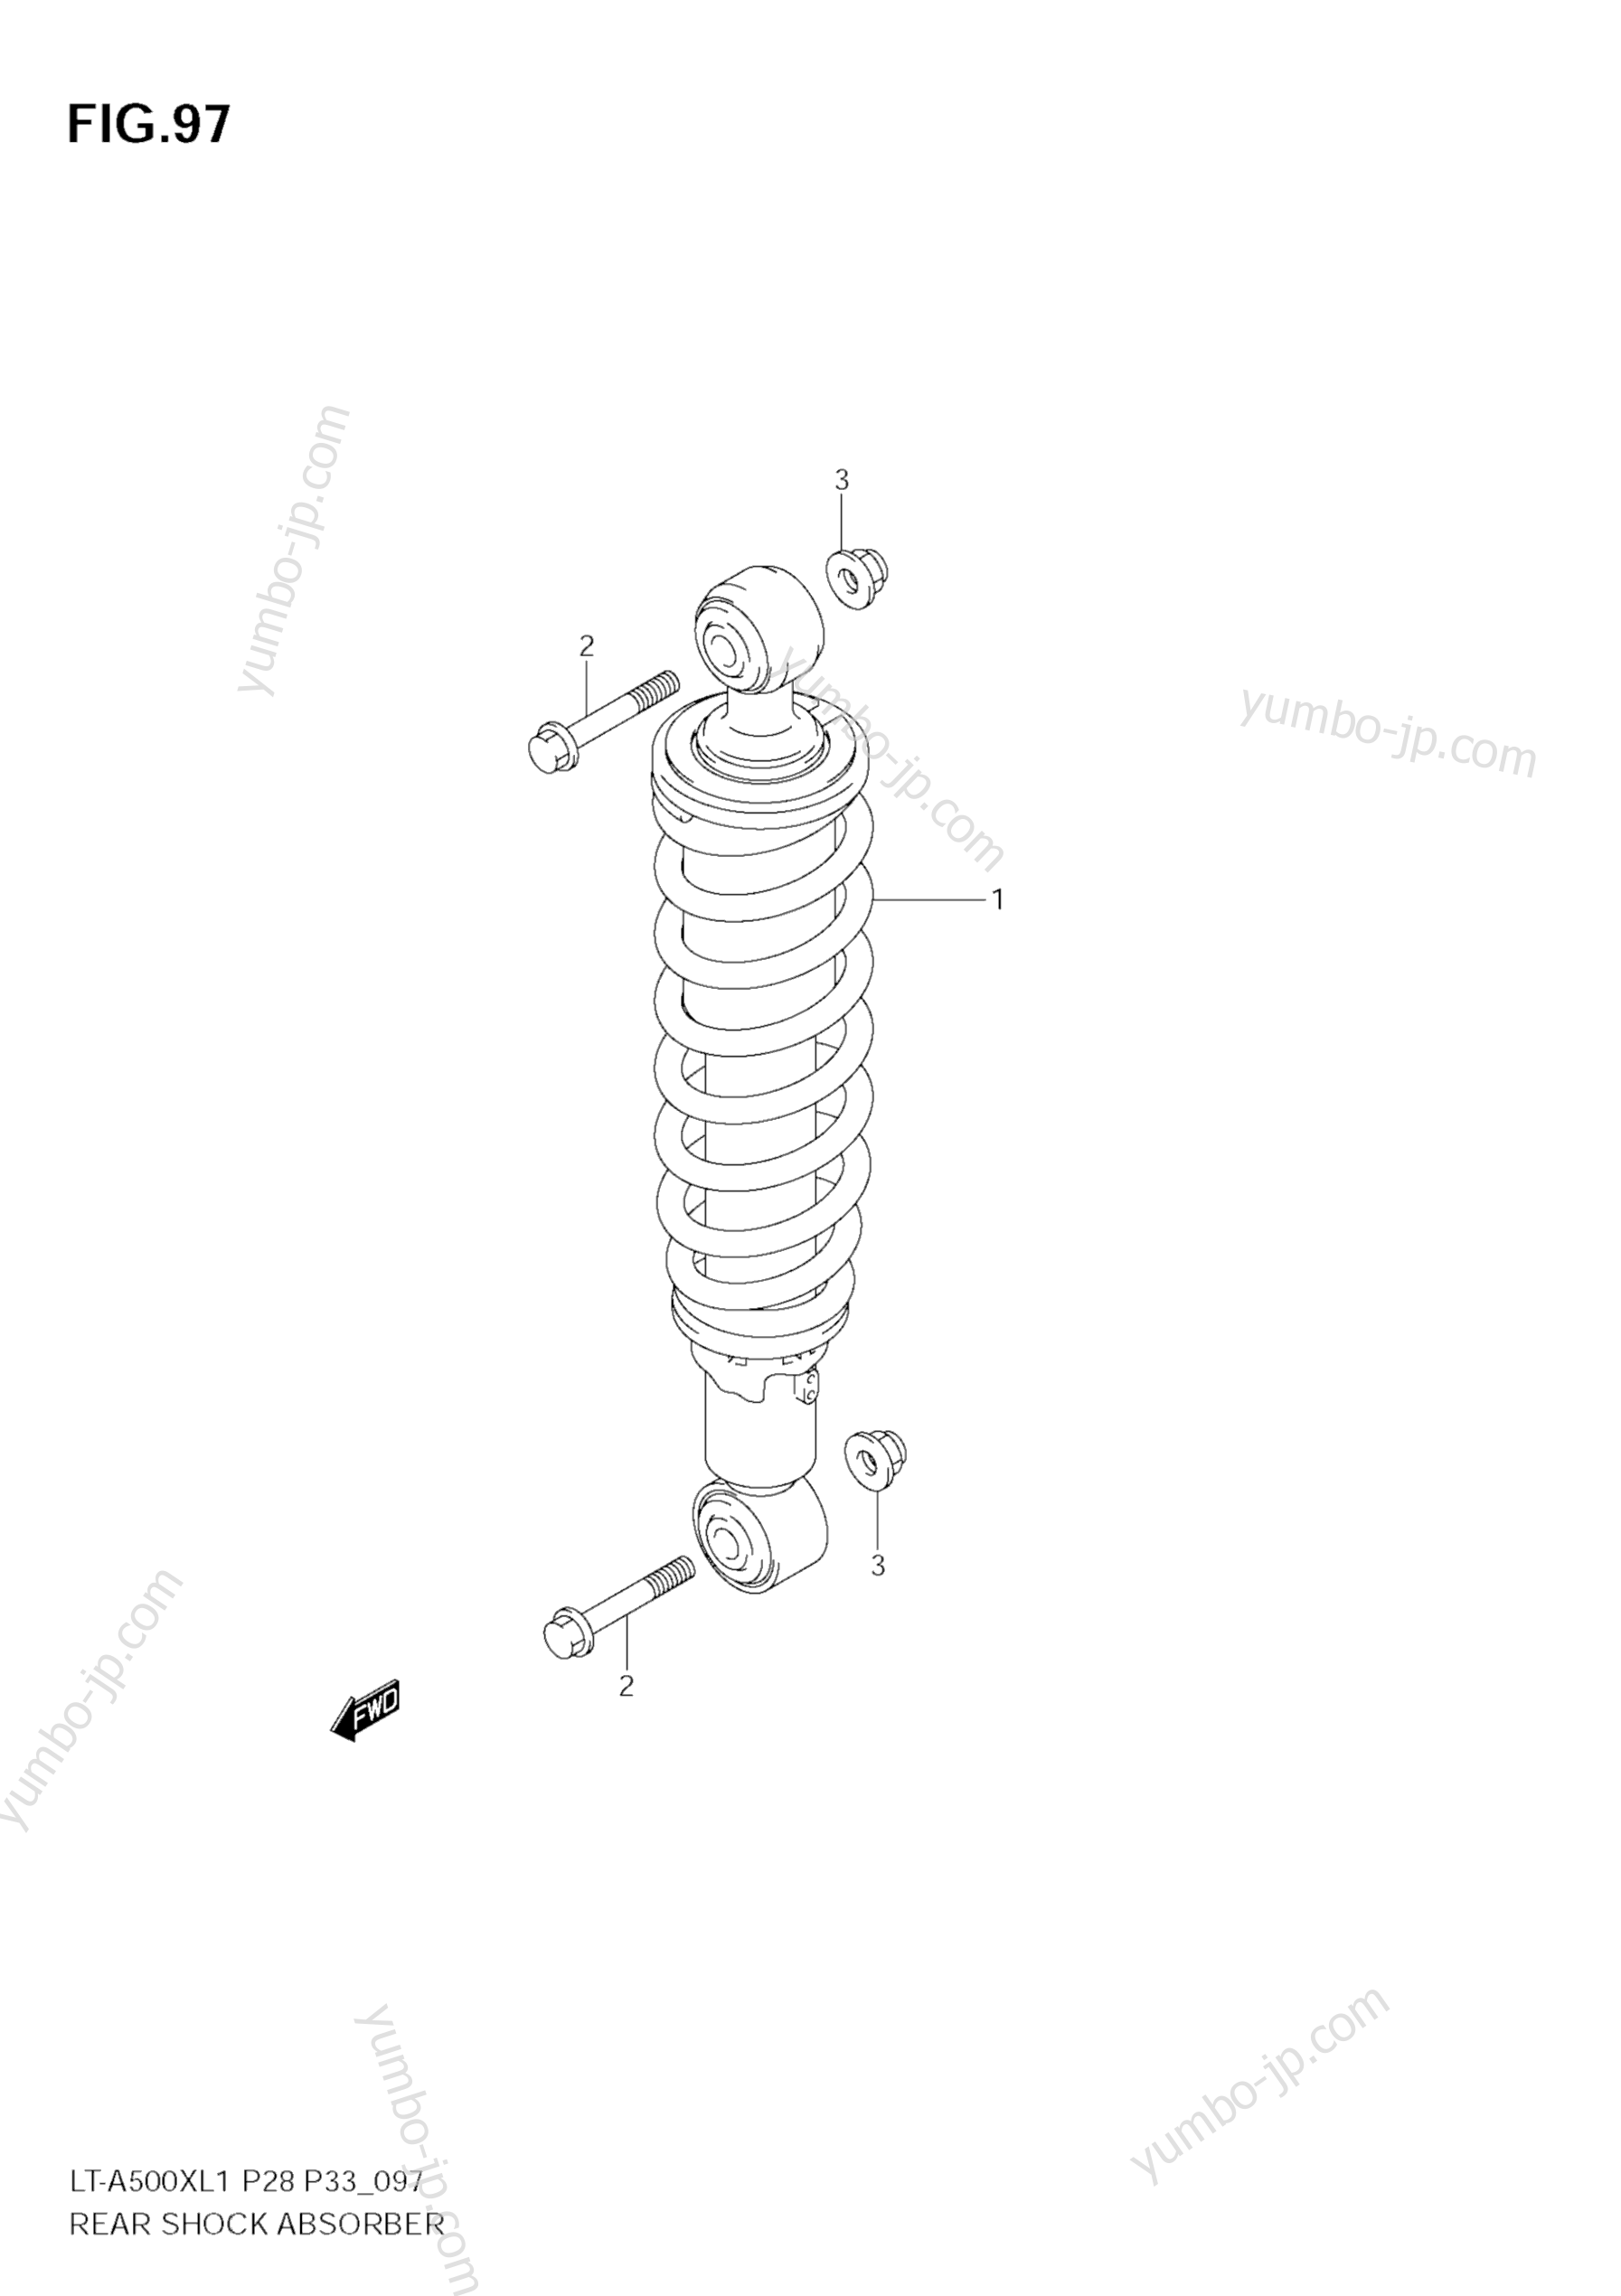 REAR SHOCK ABSORBER for ATVs SUZUKI KingQuad (LT-A500X) 2011 year